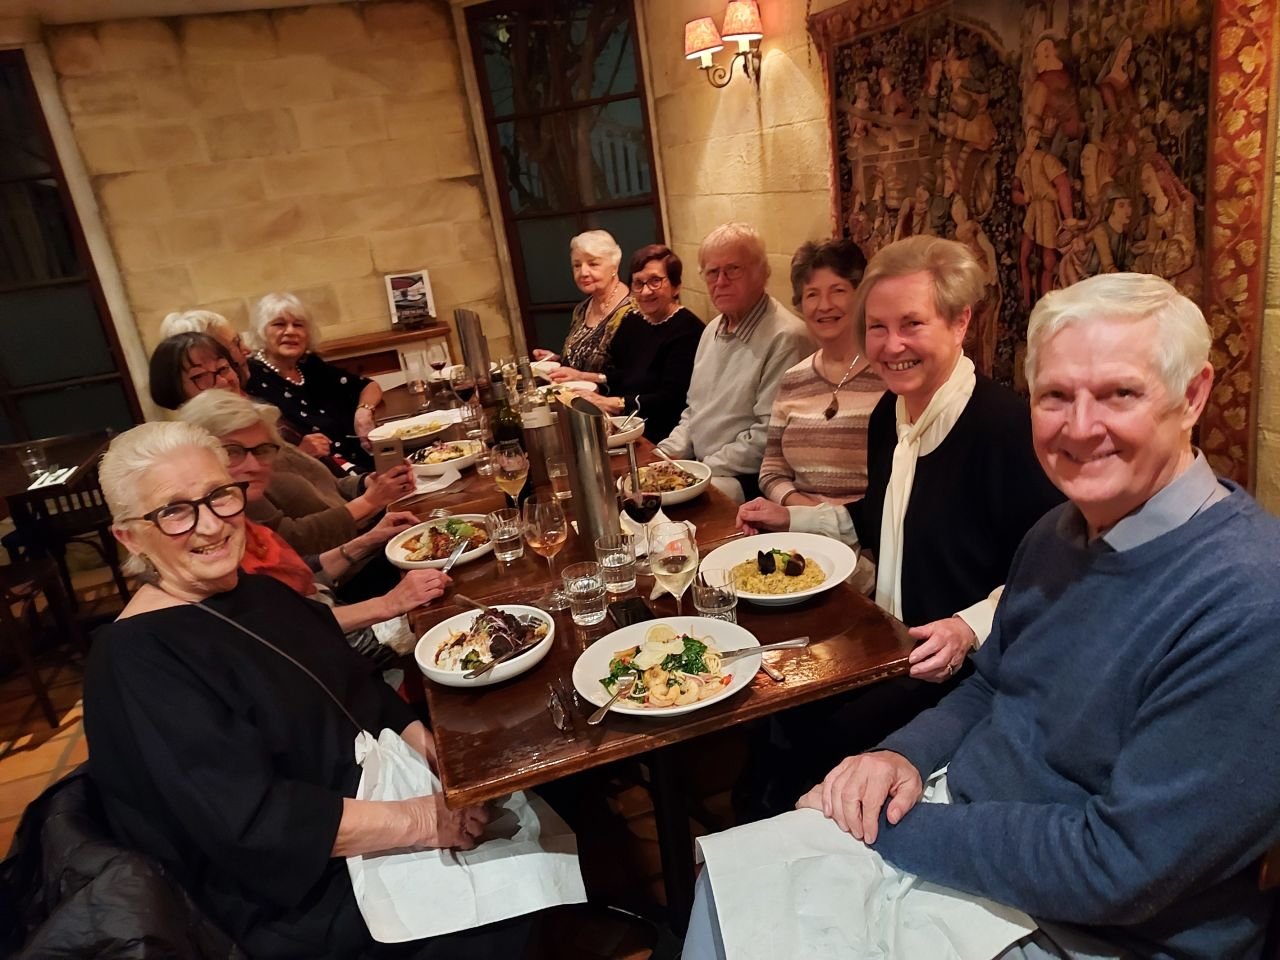 Our July 2021 evening dinner the Continental Cafe in Barker Street, New Farm. An opportunity to get to know two new members and enjoy delicious food. A very enjoyable evening.